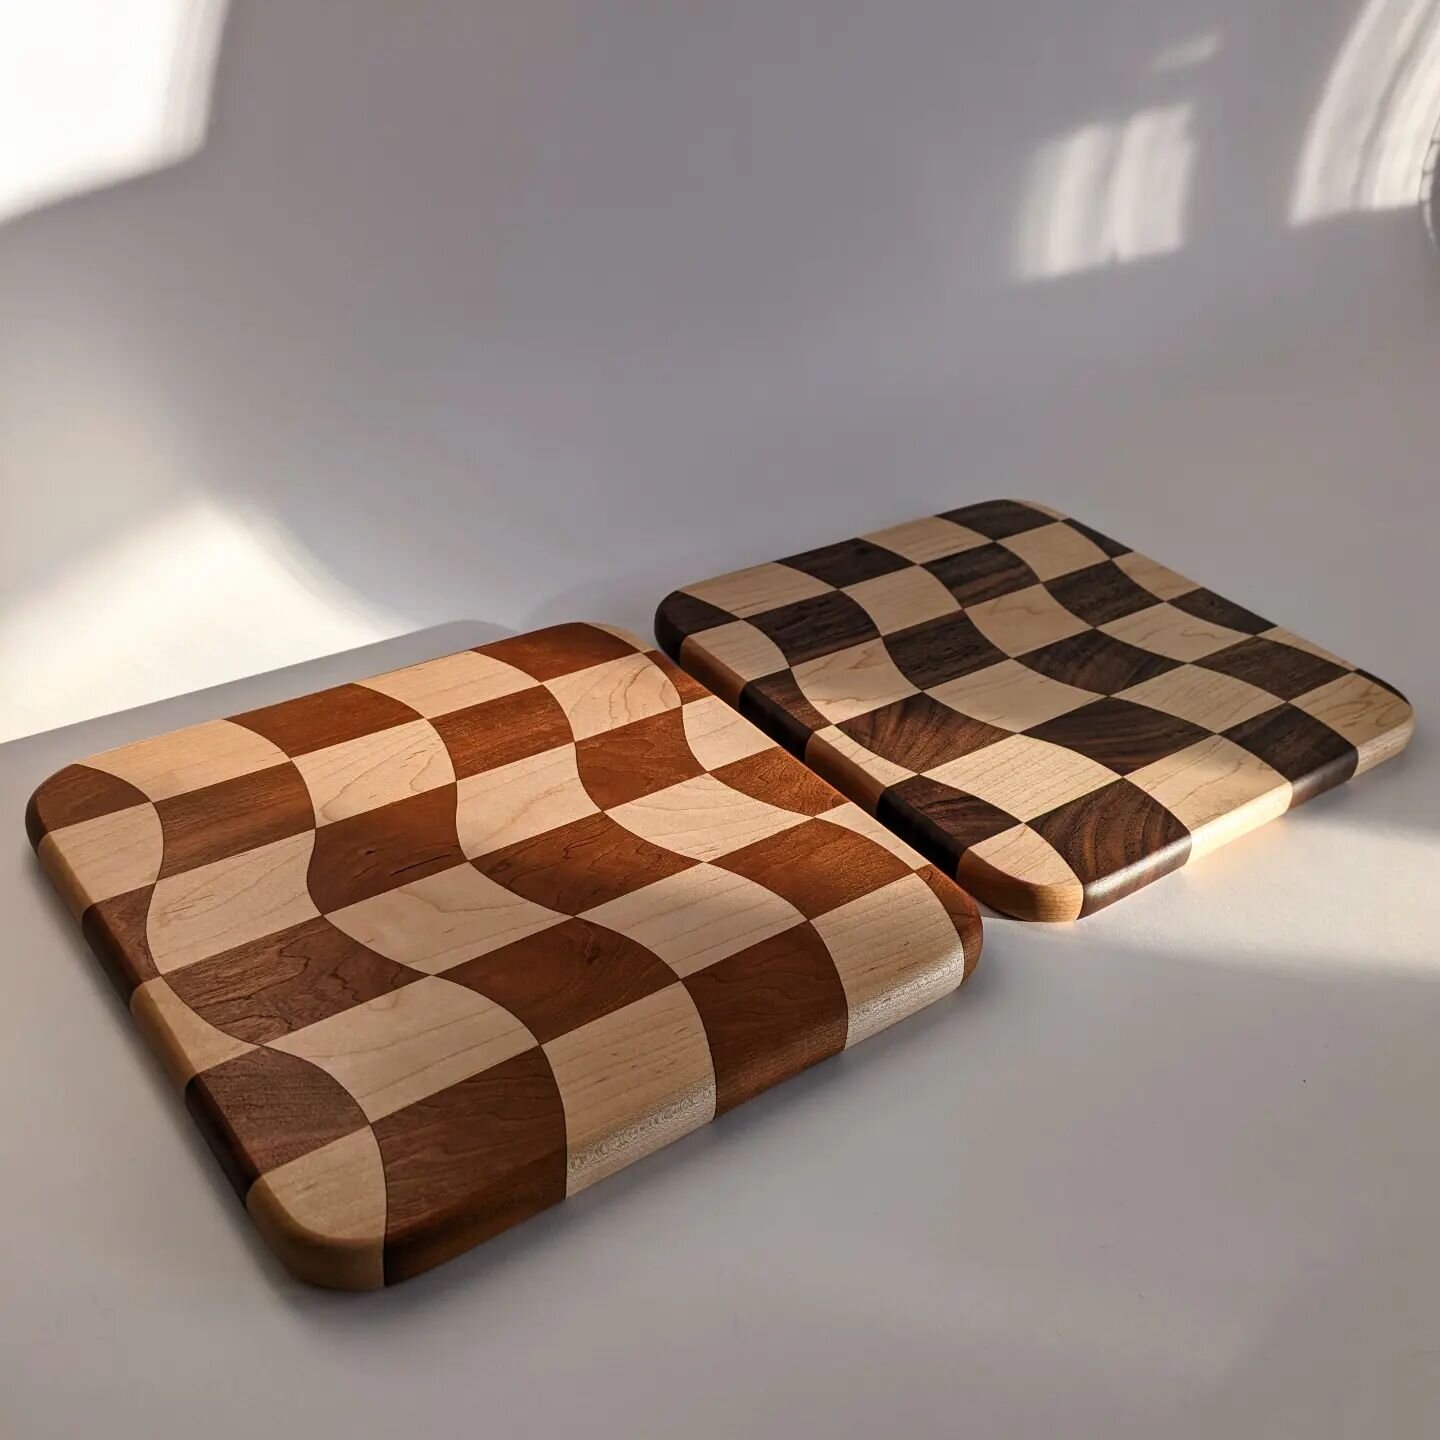 Introducing the Checkered Cheese Board - Offered in various shapes, sizes and wood types, these serving boards are perfect for charcuterie, a spread of cheeses, or most anything you'd like! Let those subtle waves lull you and your snack into a delici